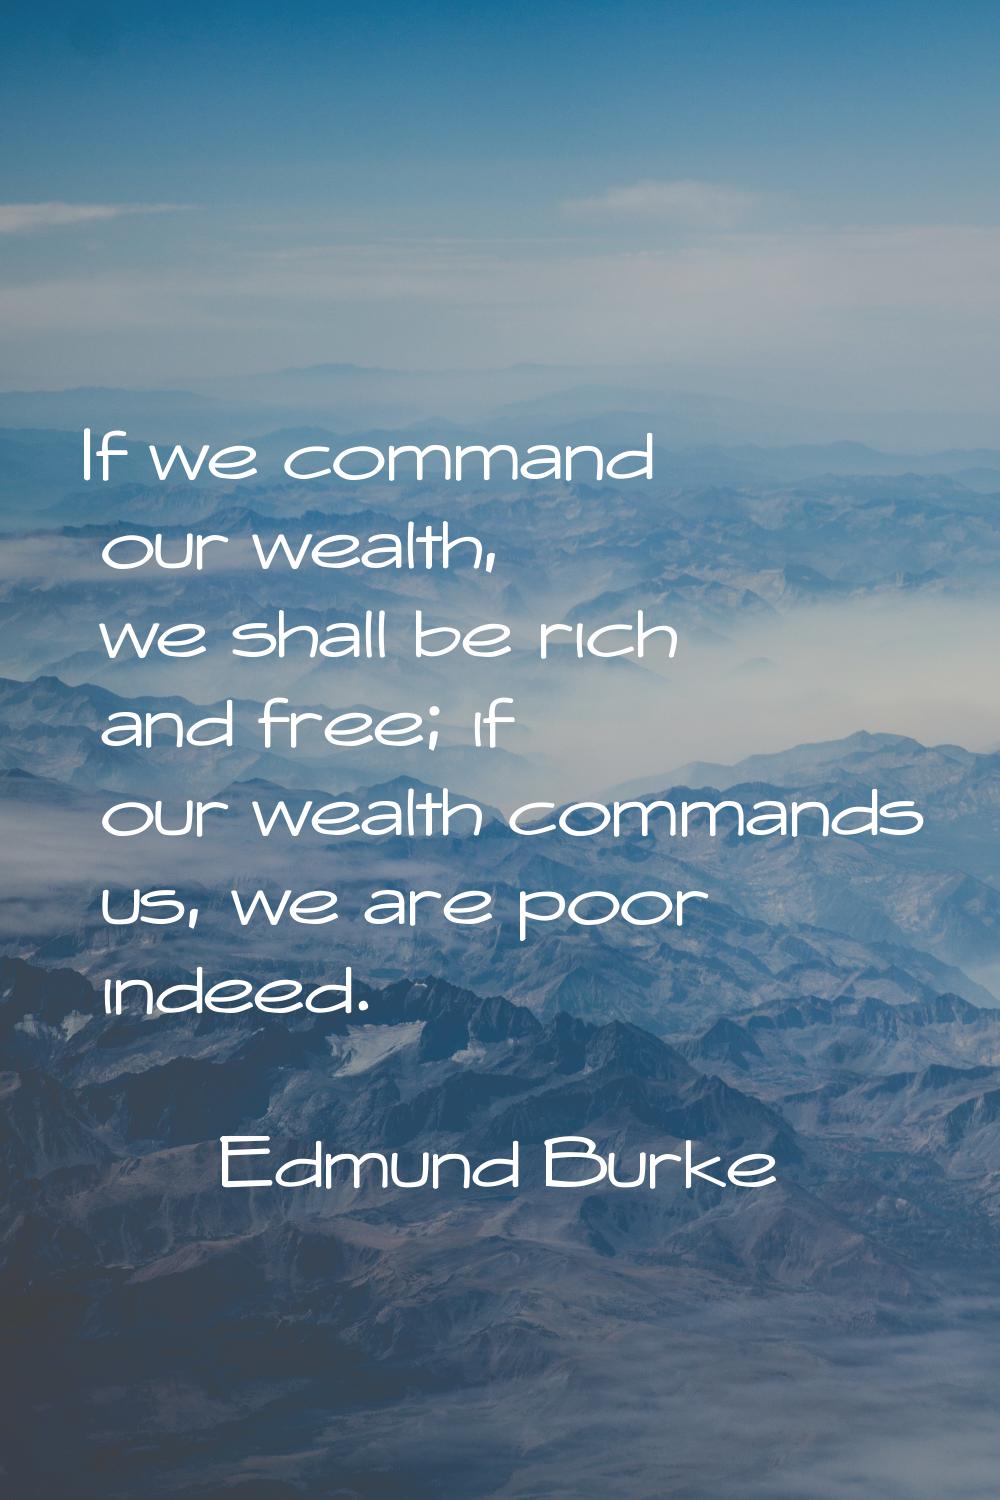 If we command our wealth, we shall be rich and free; if our wealth commands us, we are poor indeed.